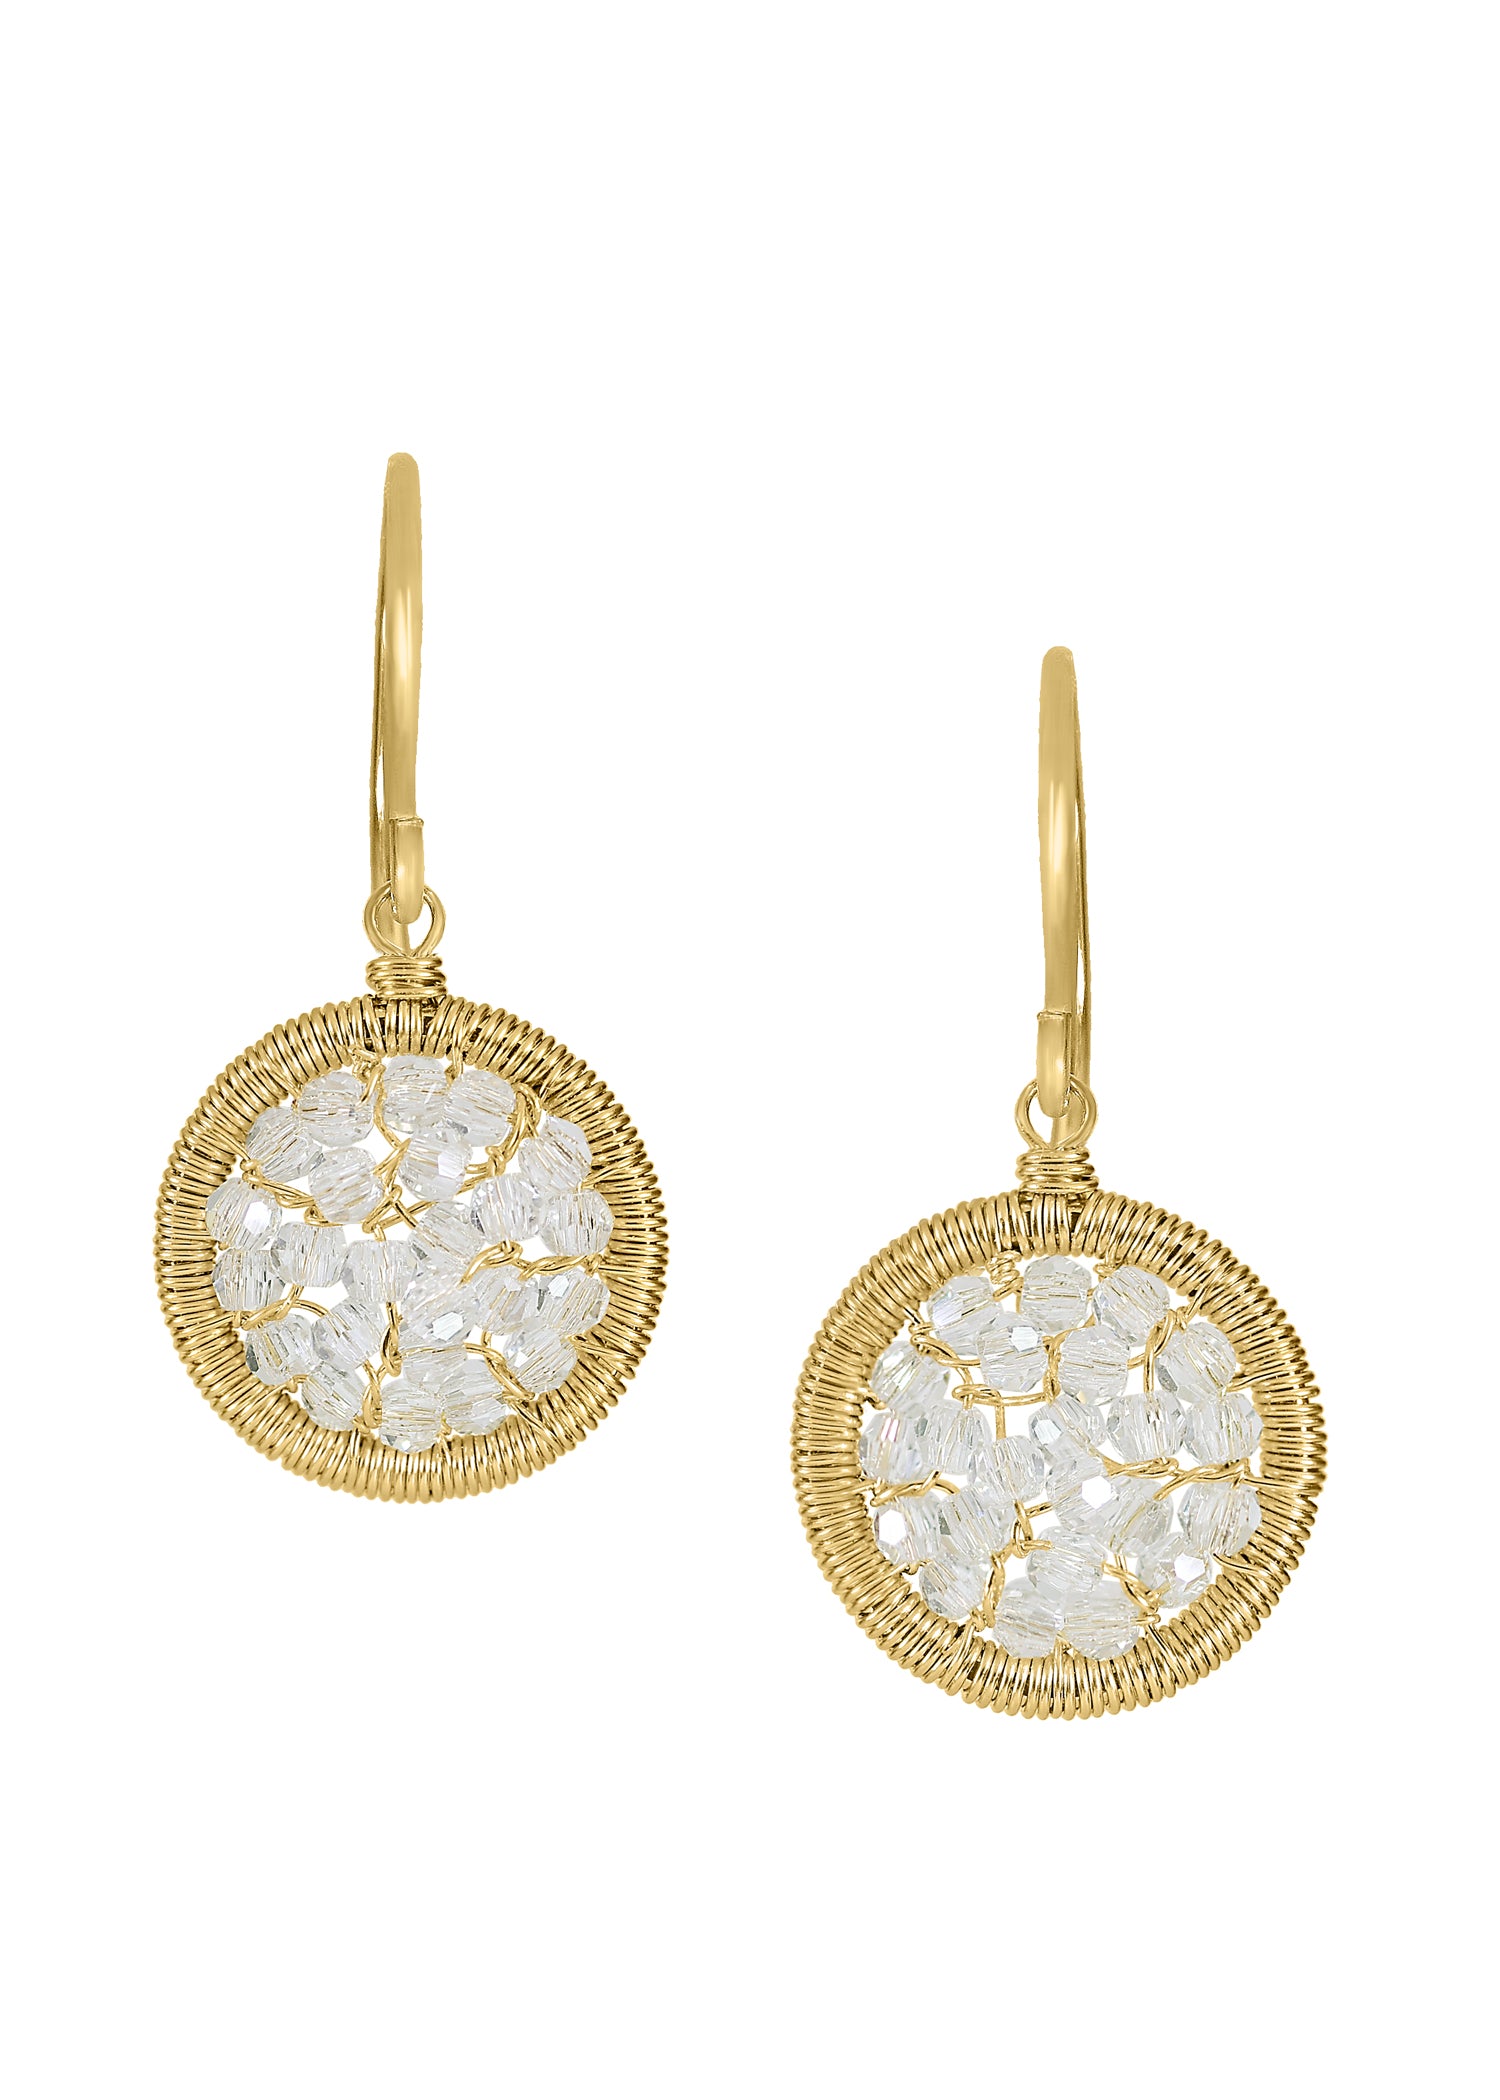 Crystal 14k gold fill Earrings measure 1" in length (including the ear wires) and 1/2" in width Handmade in our Los Angeles studio